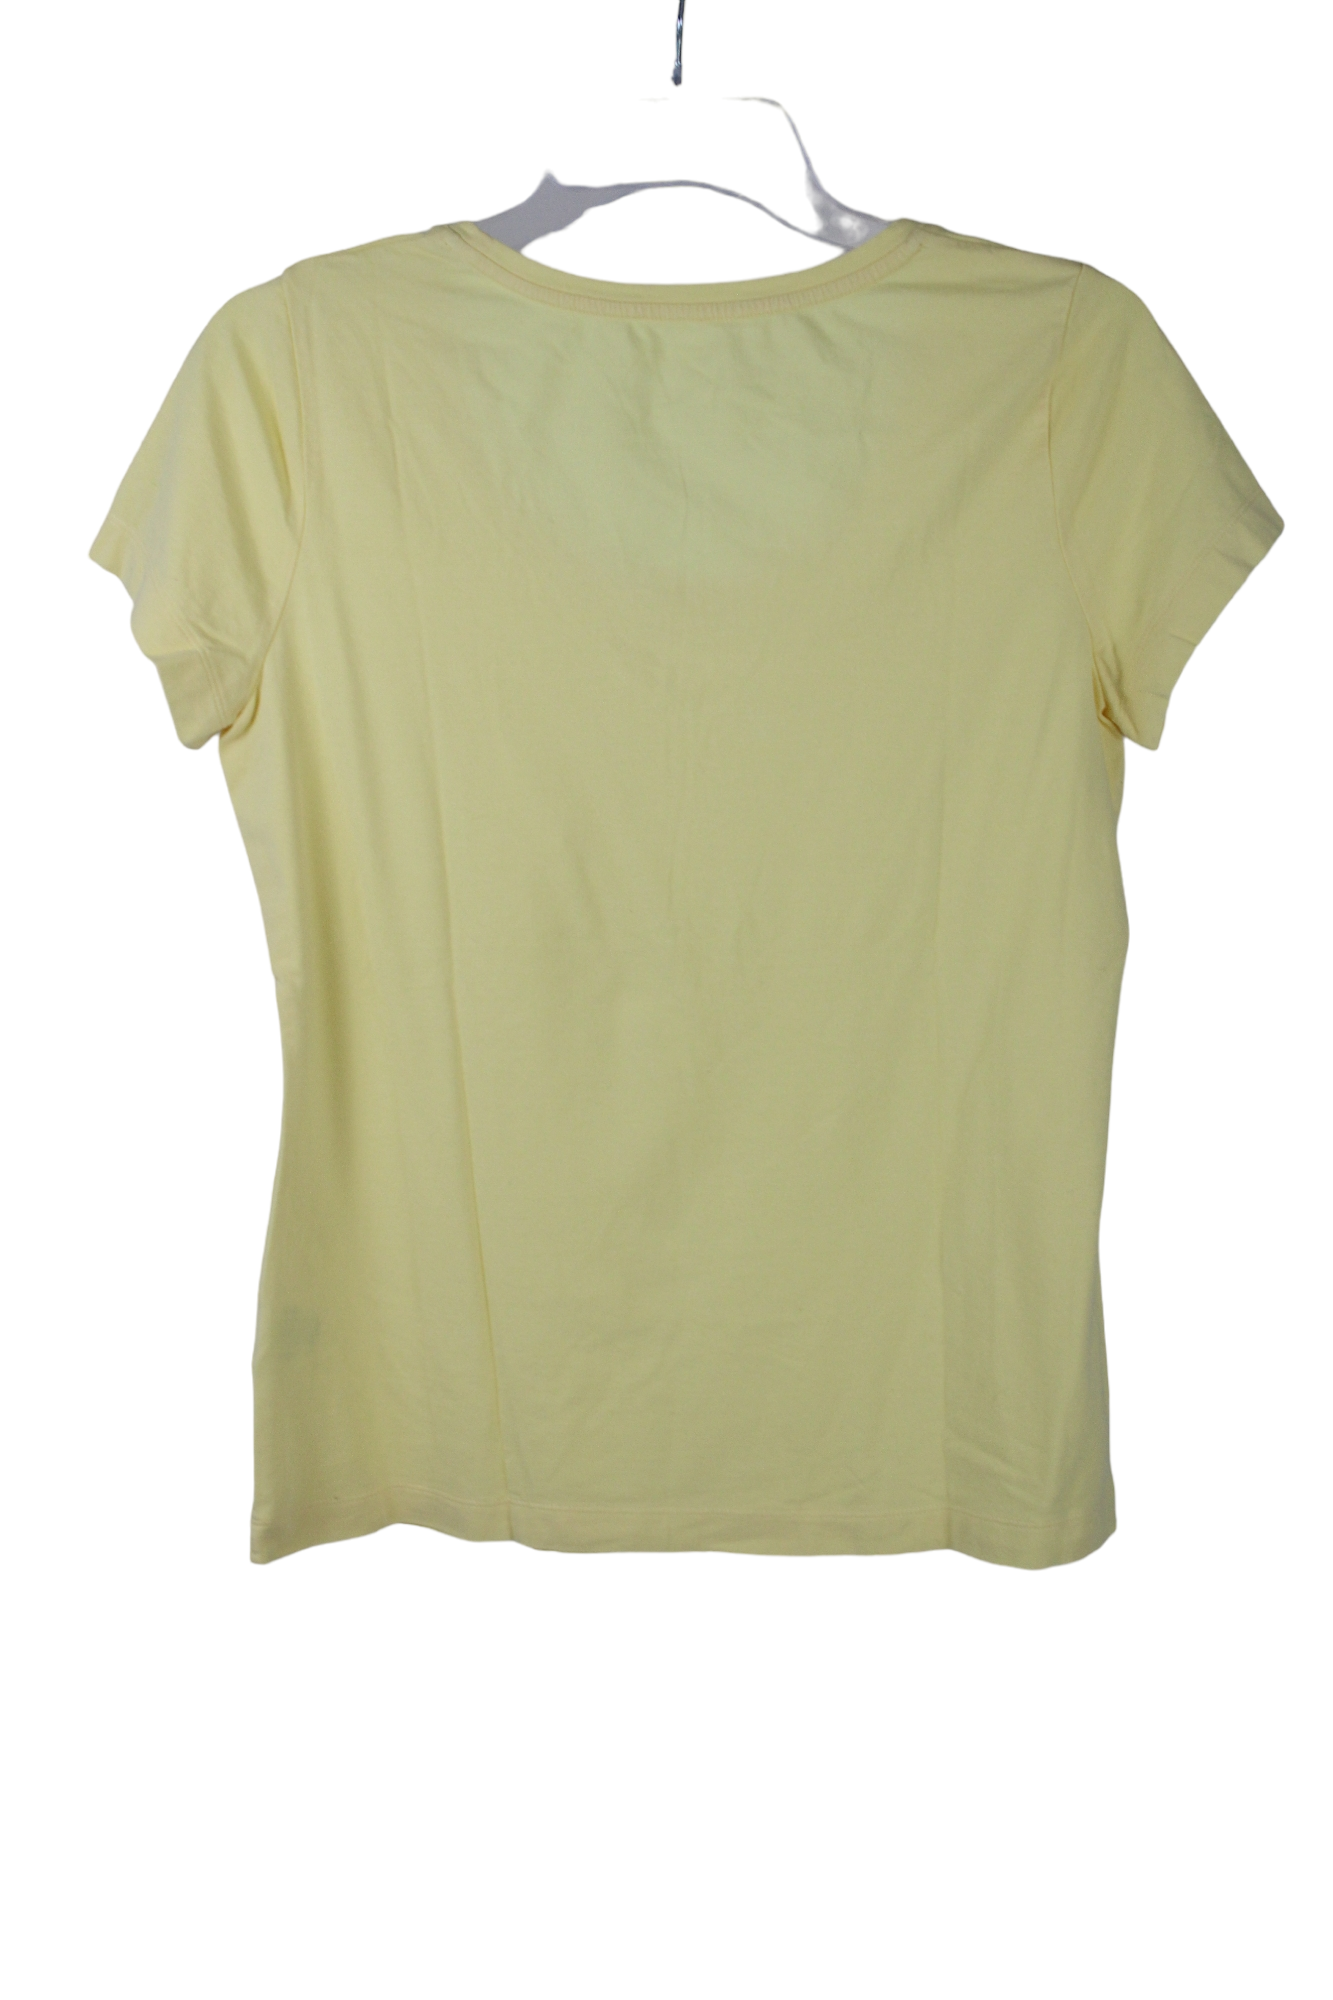 Lands' End Pale Yellow Butter Soft Tee | M